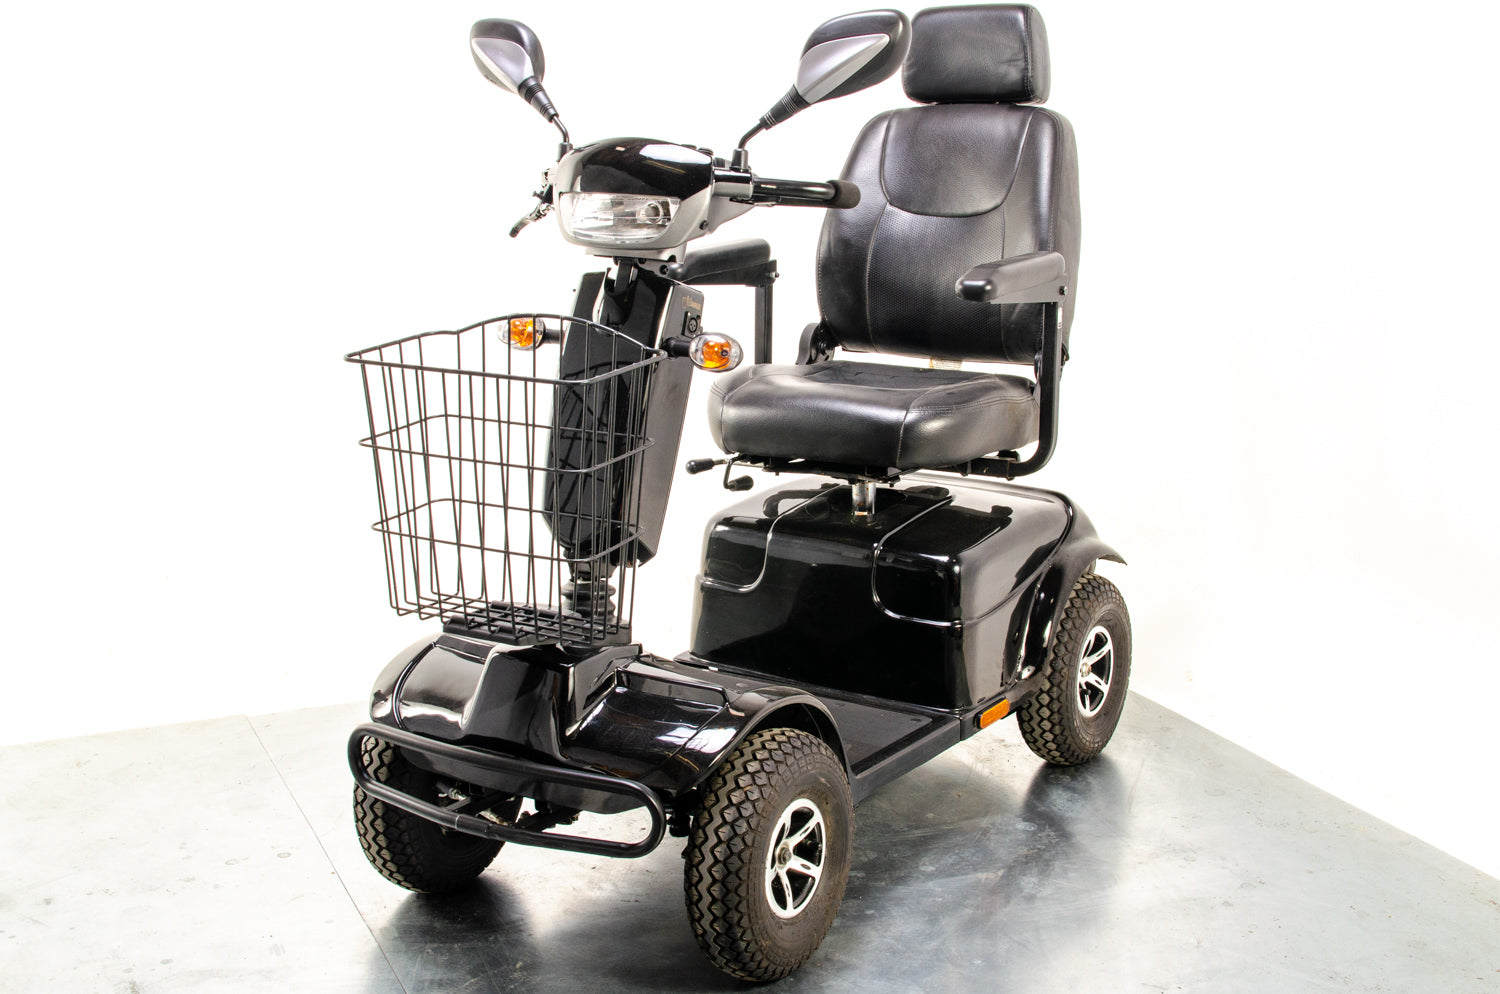 Rascal Pioneer Used Electric Mobility Scooter 8mph All-Terrain Suspension Off-Road Black 13084